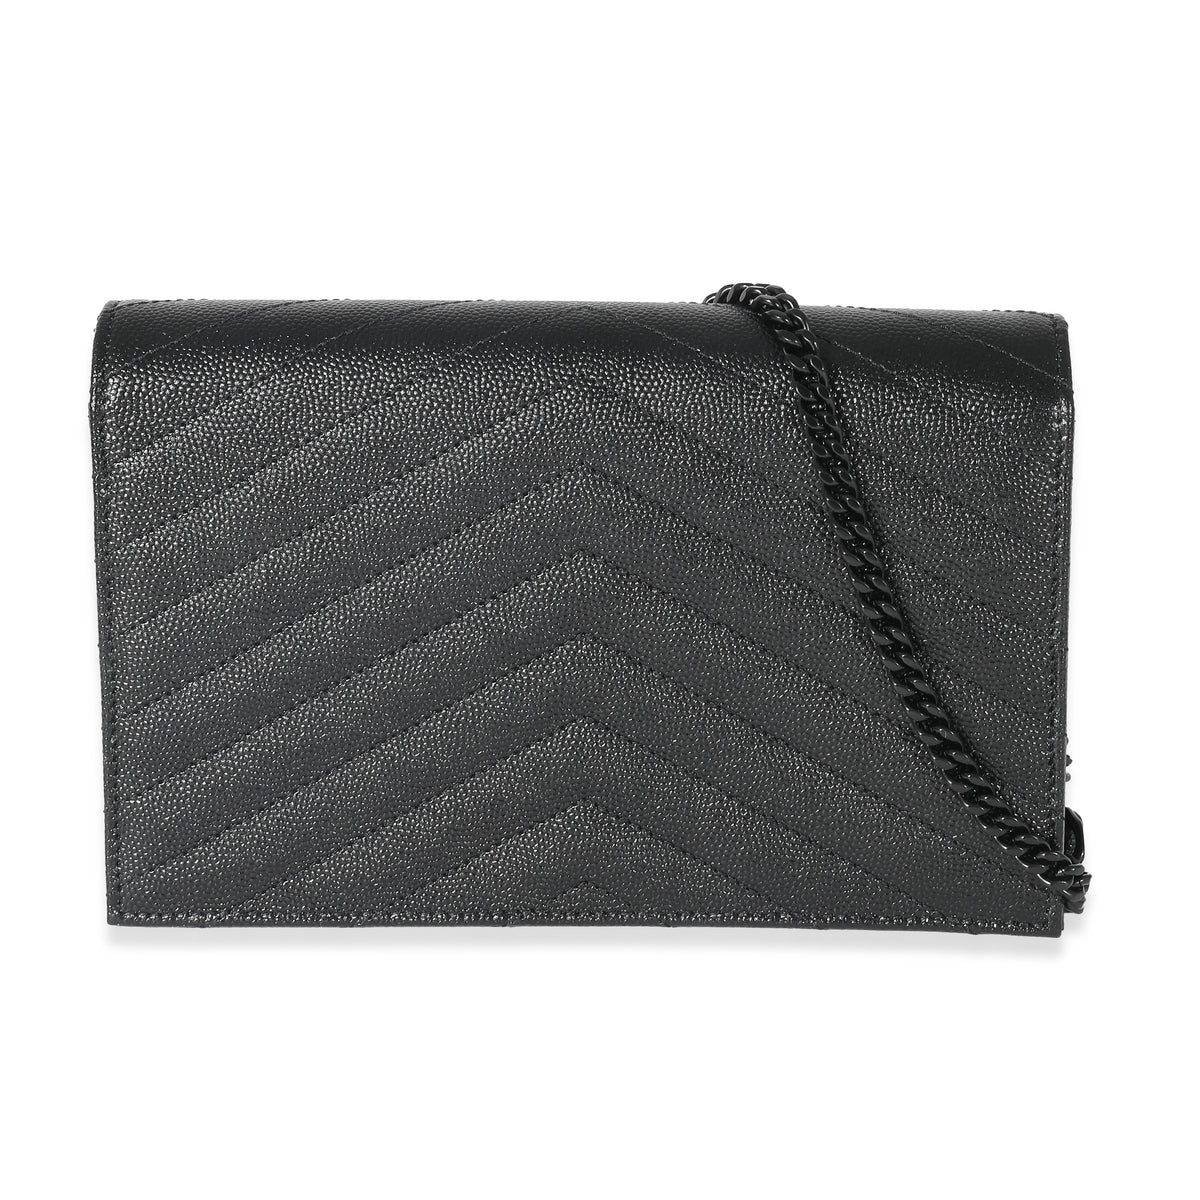 Saint Laurent Monogram Quilted Leather Pouch Black GHW